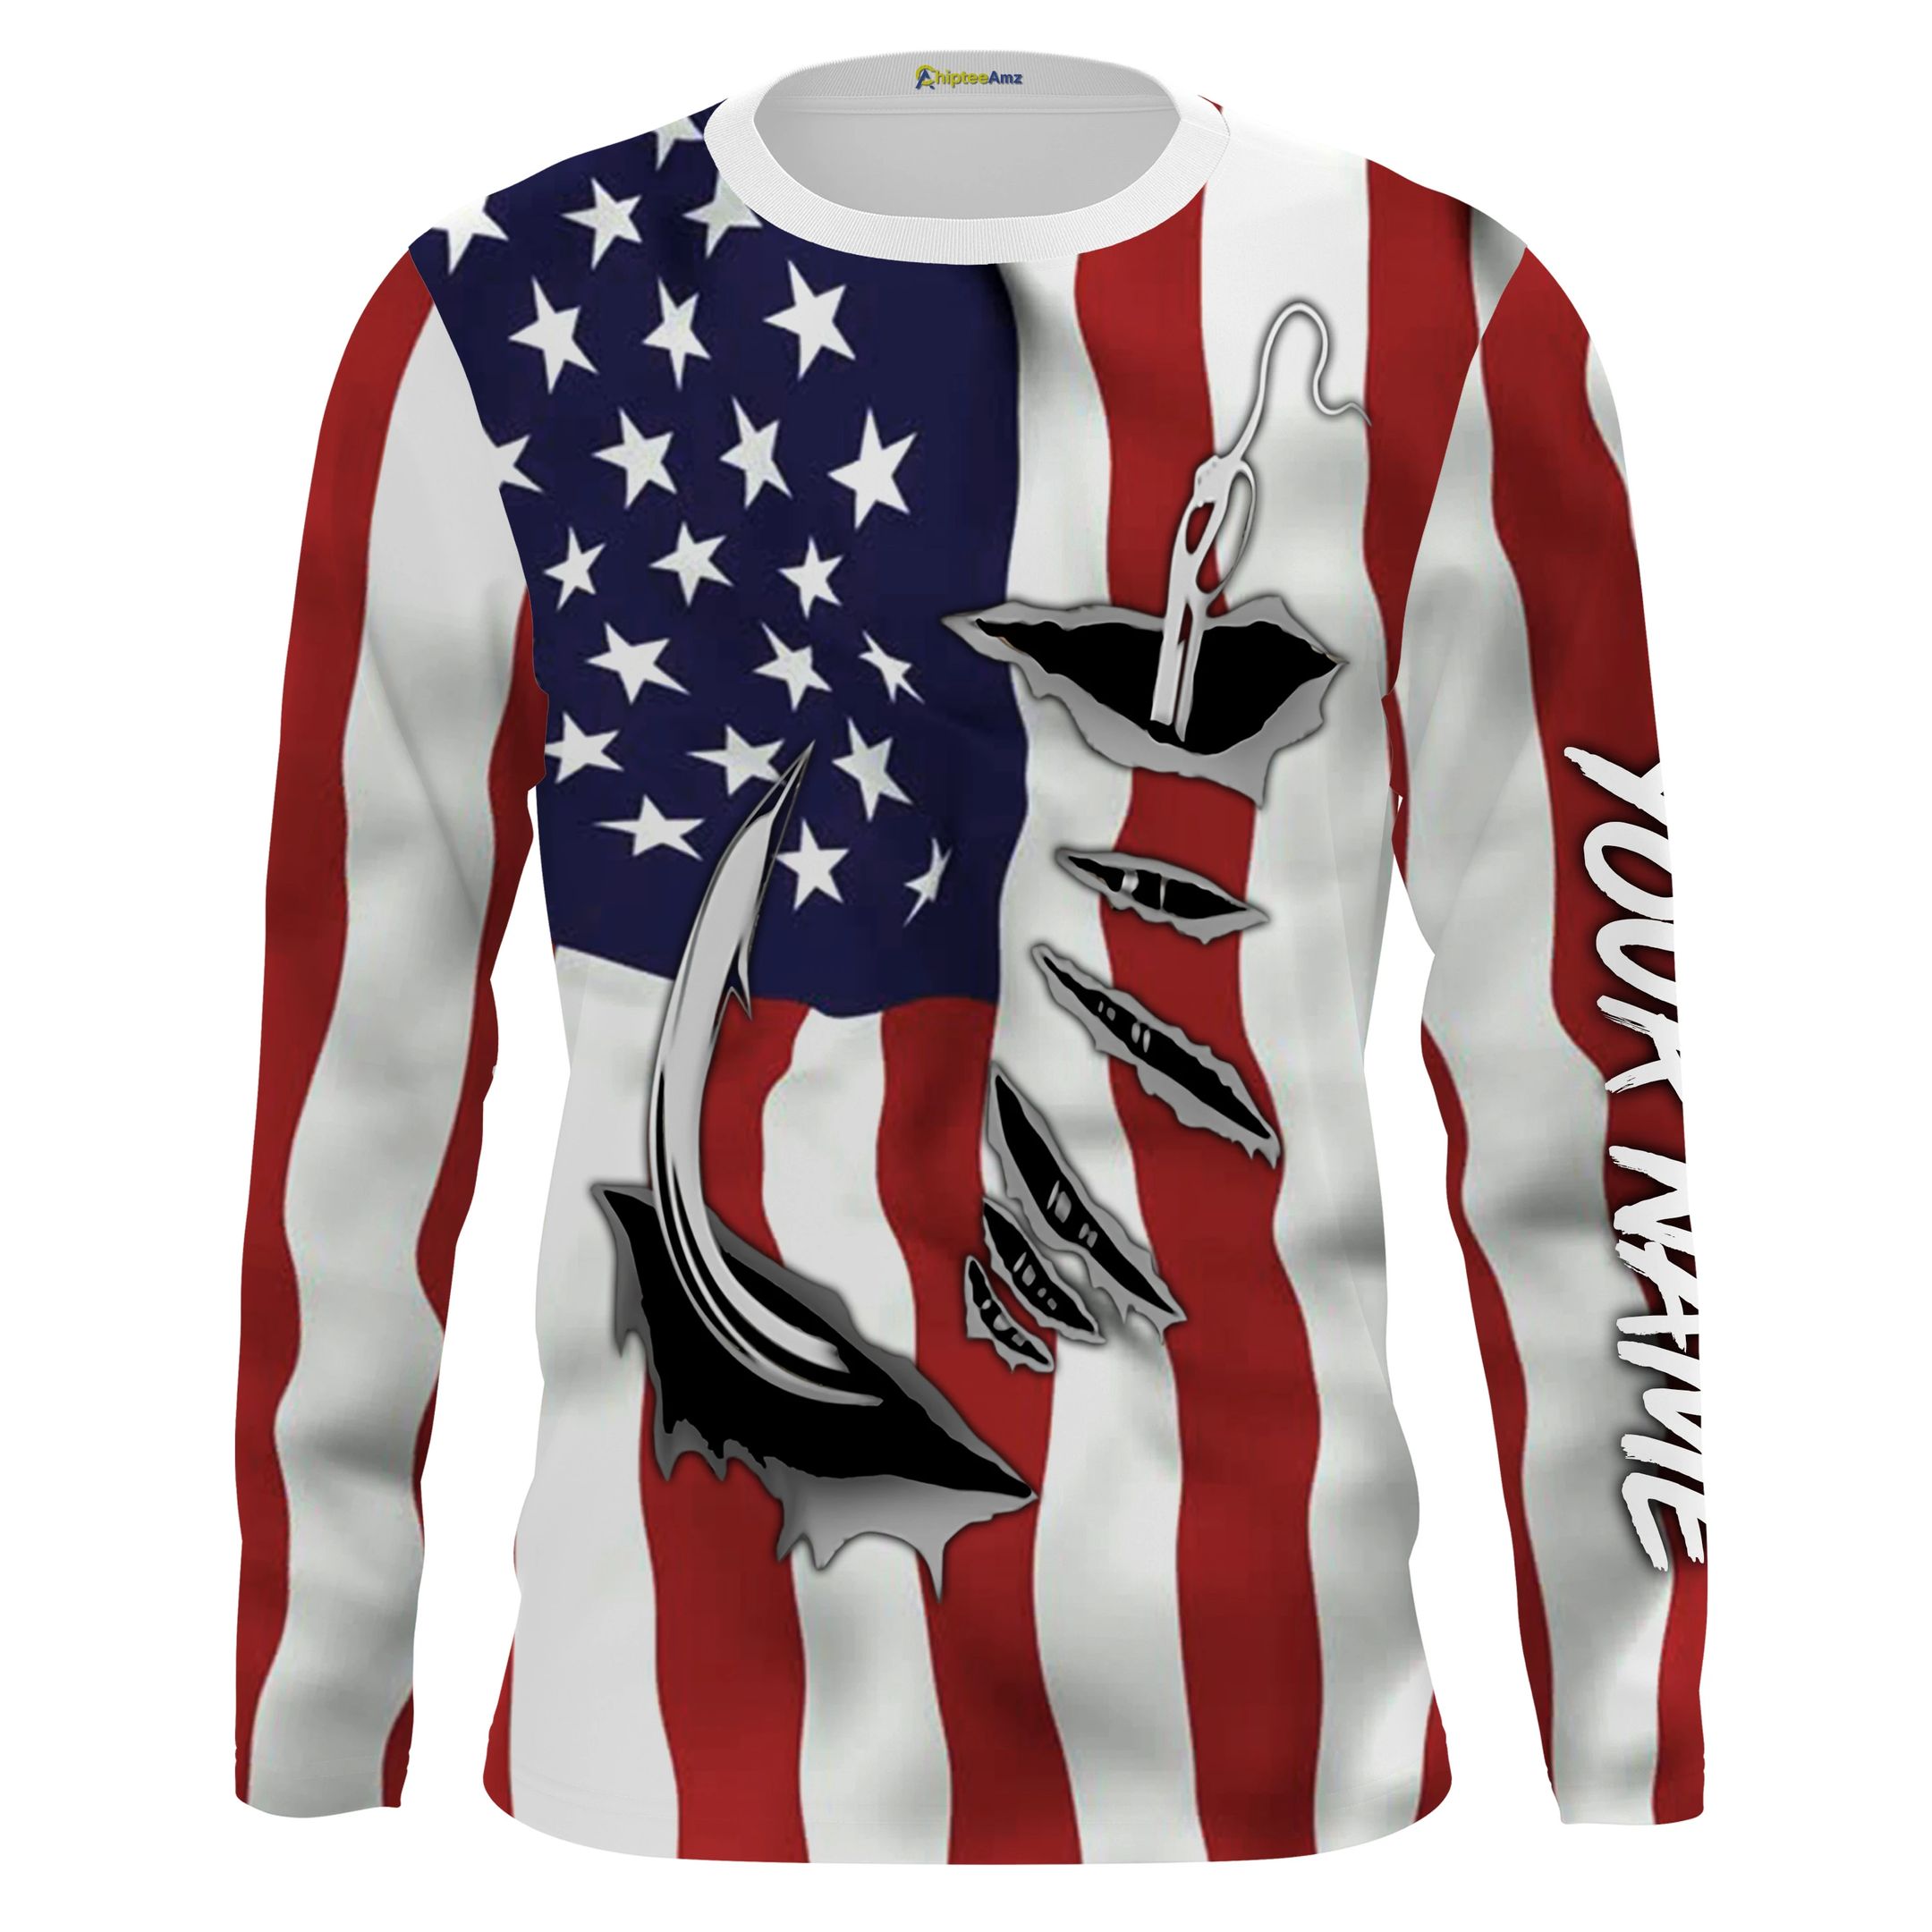 US fishing fish hook american flag 3d all over print shirt Style: 3D Sweatshirt, Size: S